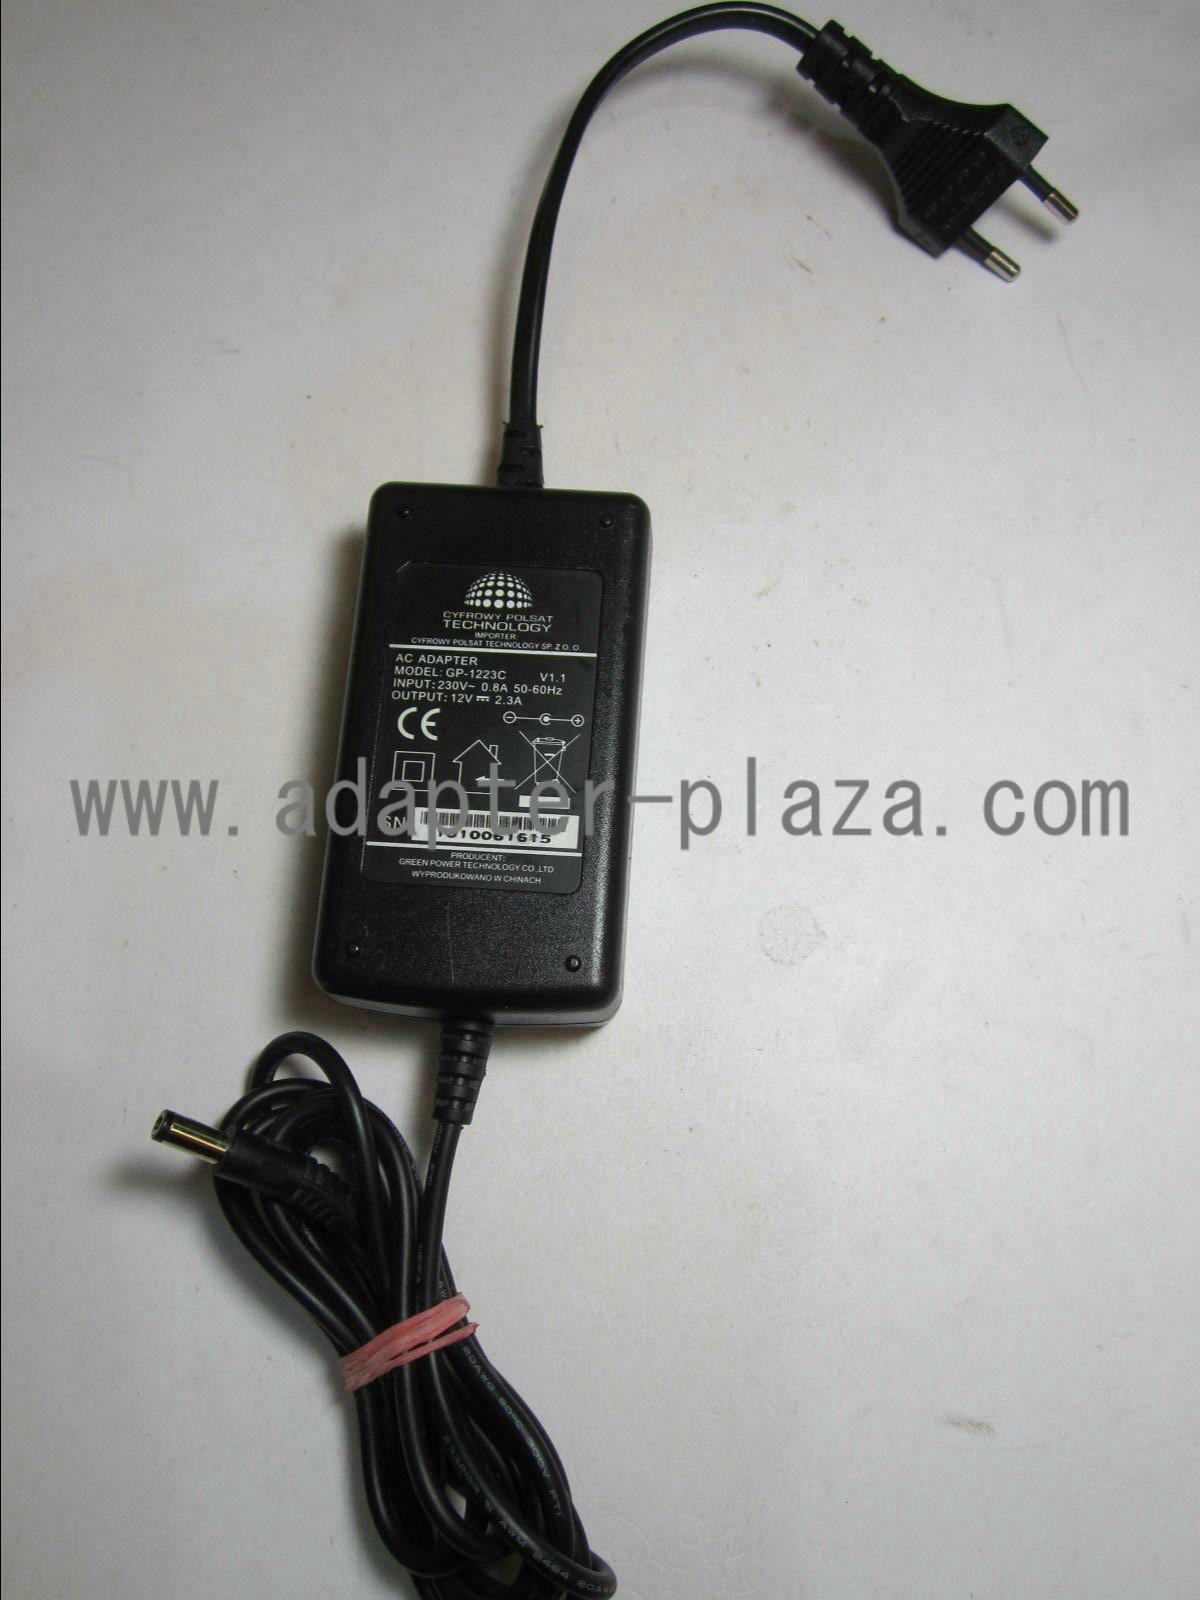 New 12V 2.3A AC ADAPTOR POWER SUPPLY FOR LACIE GP-ACW030A-12T GPC-ACD048A-12 PSU PART 5.5mm x 2.1mm / 2.5mm